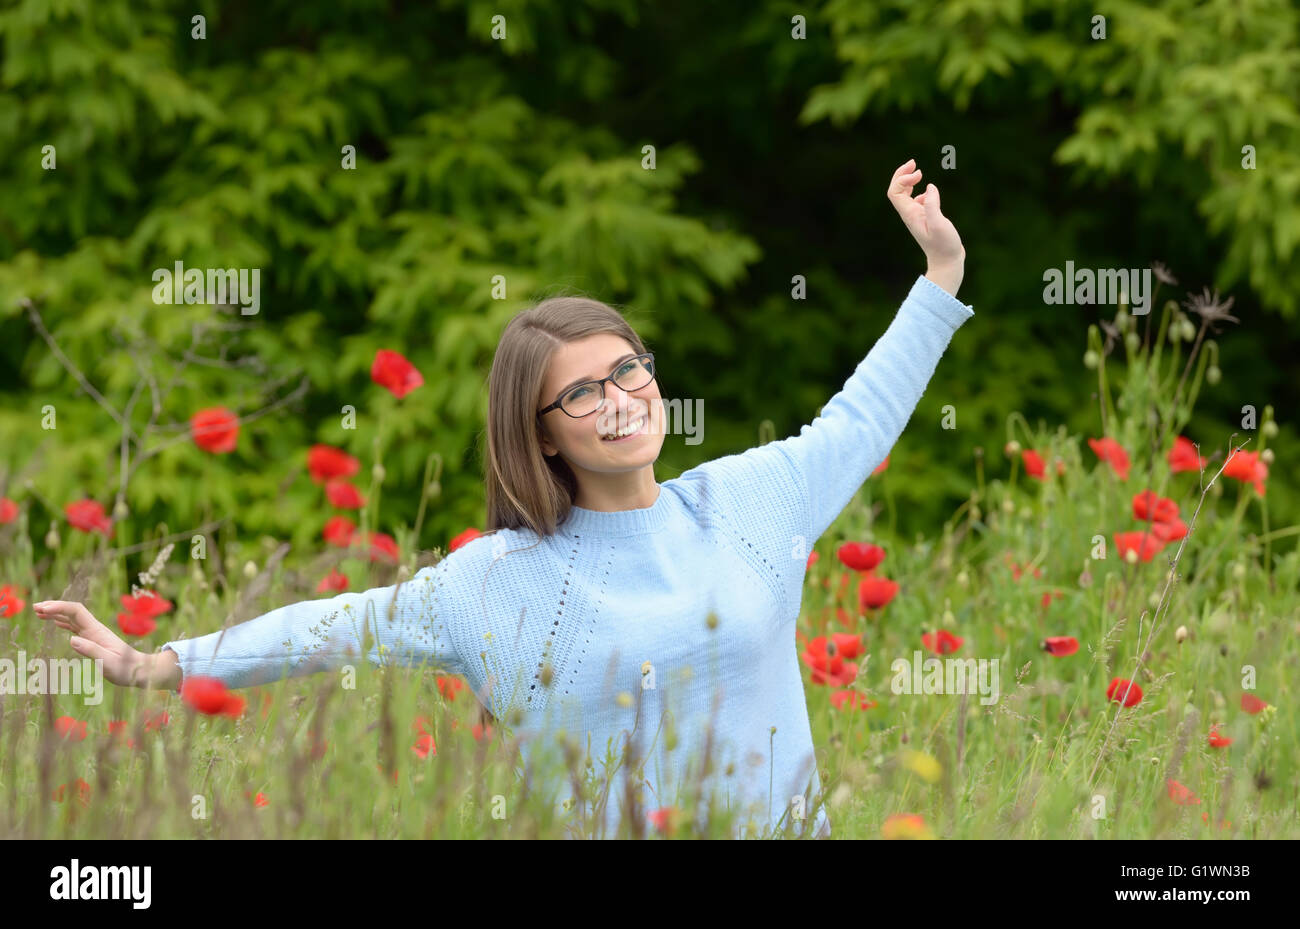 Young girl playing in a poppy field Stock Photo